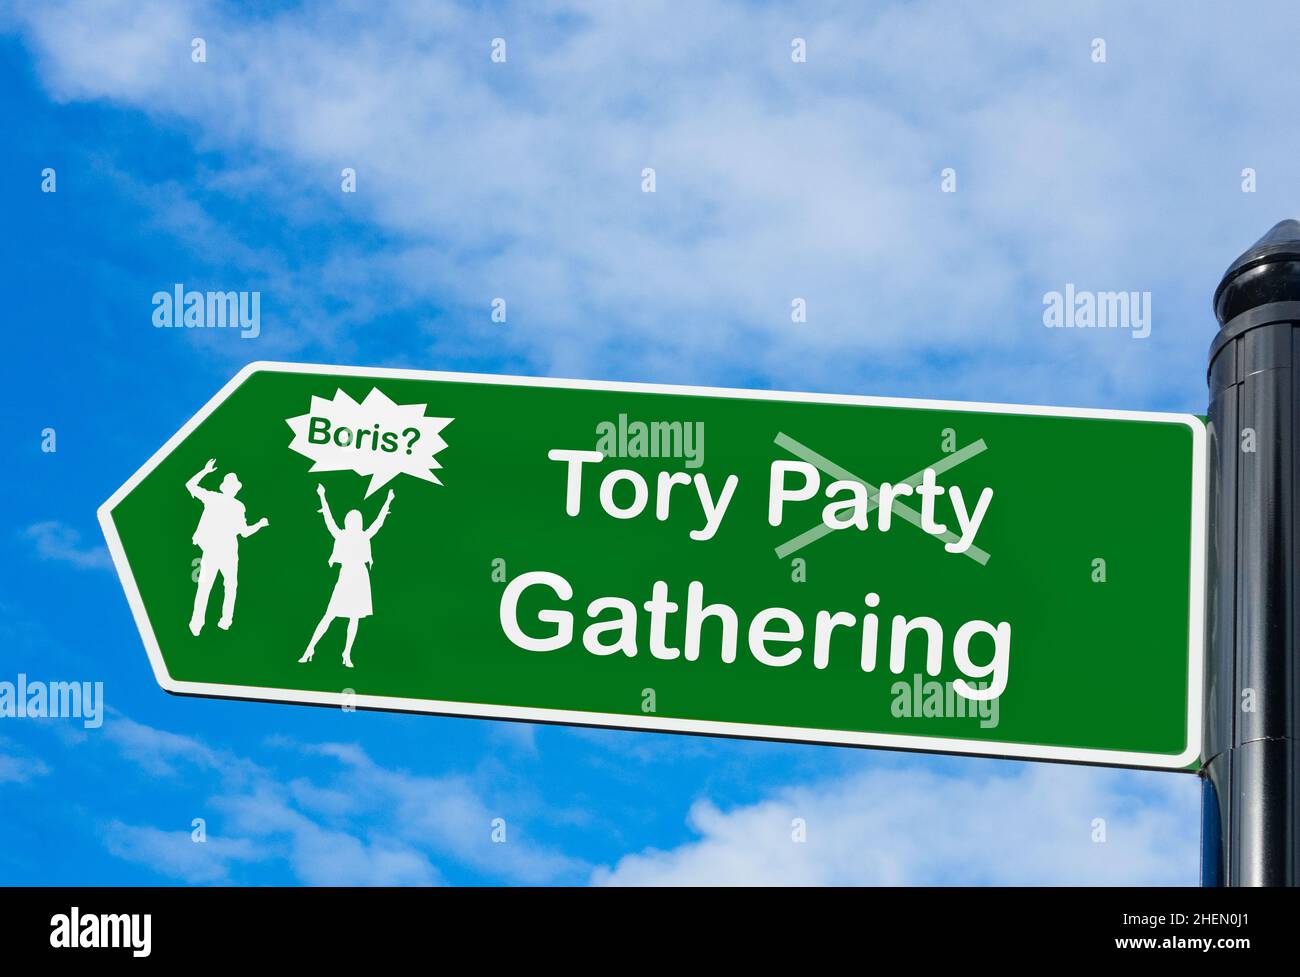 Tory party, Conservative party, gathering, Downing Street garden party, Boris Johnson, lockdown law, rules, sleaze... concept Stock Photo